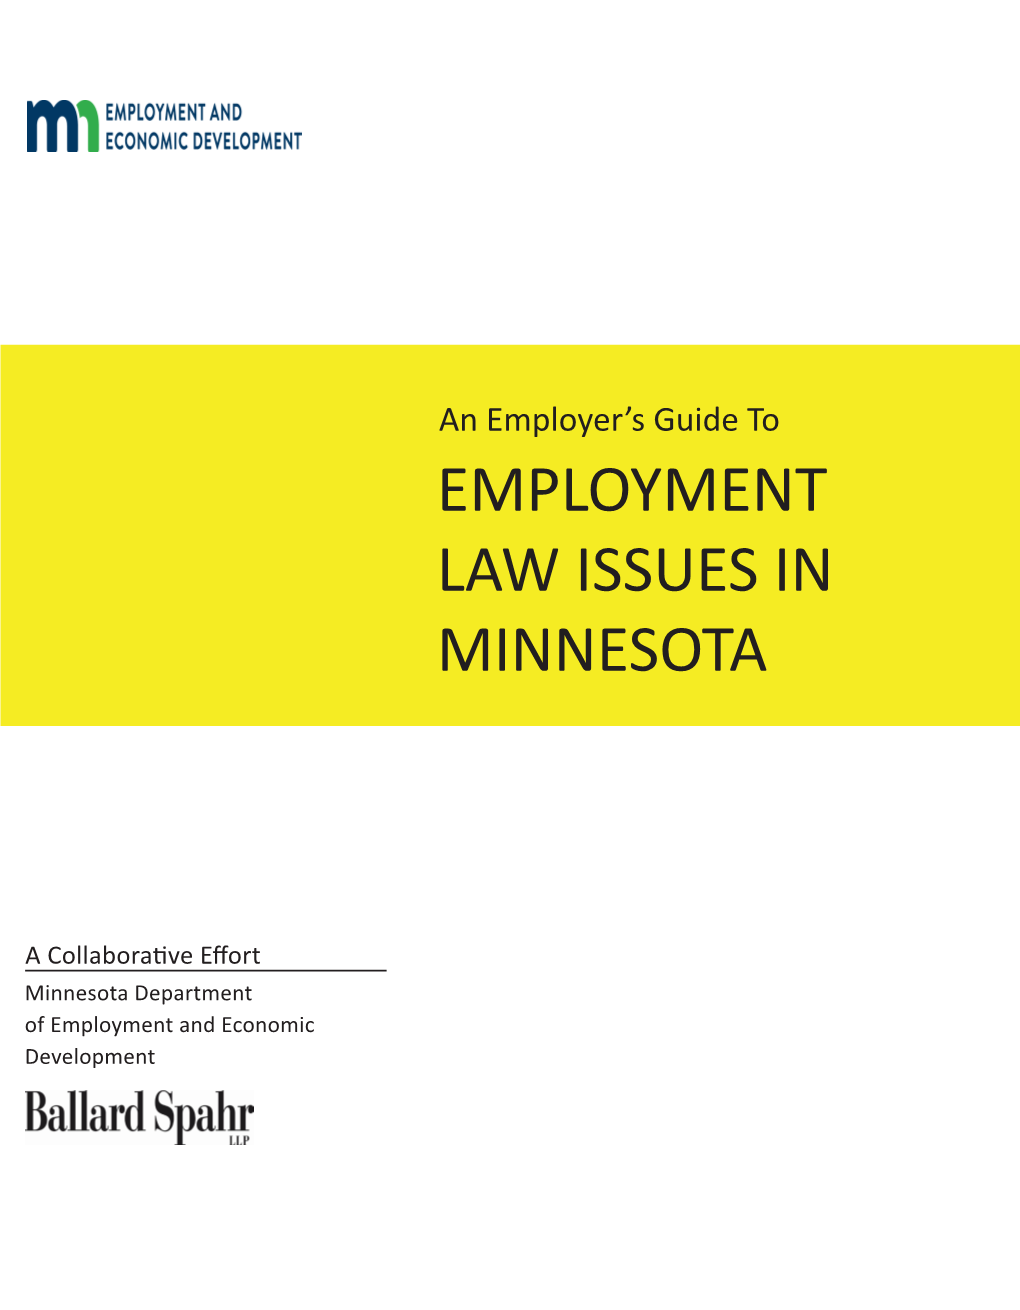 An Employer's Guide to Employment Law Issues in Minnesota